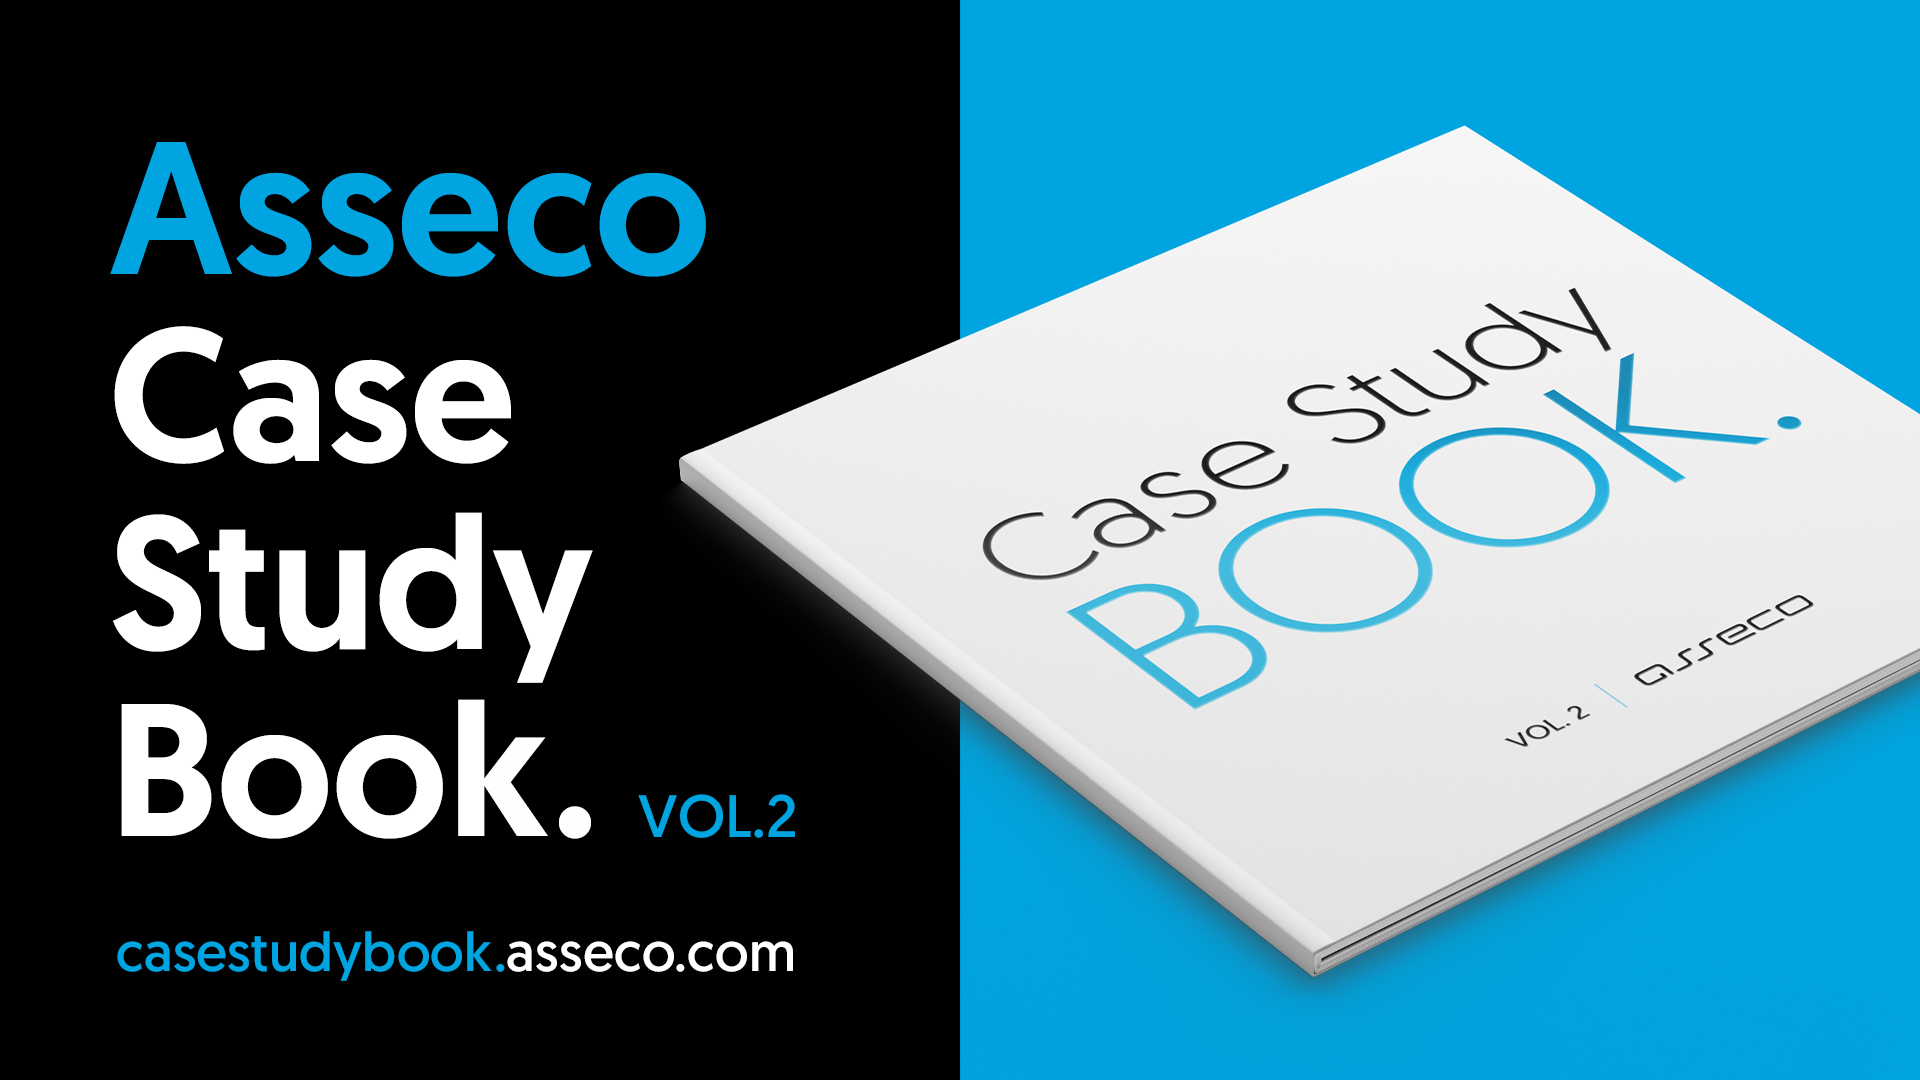 Asseco Case Study Book